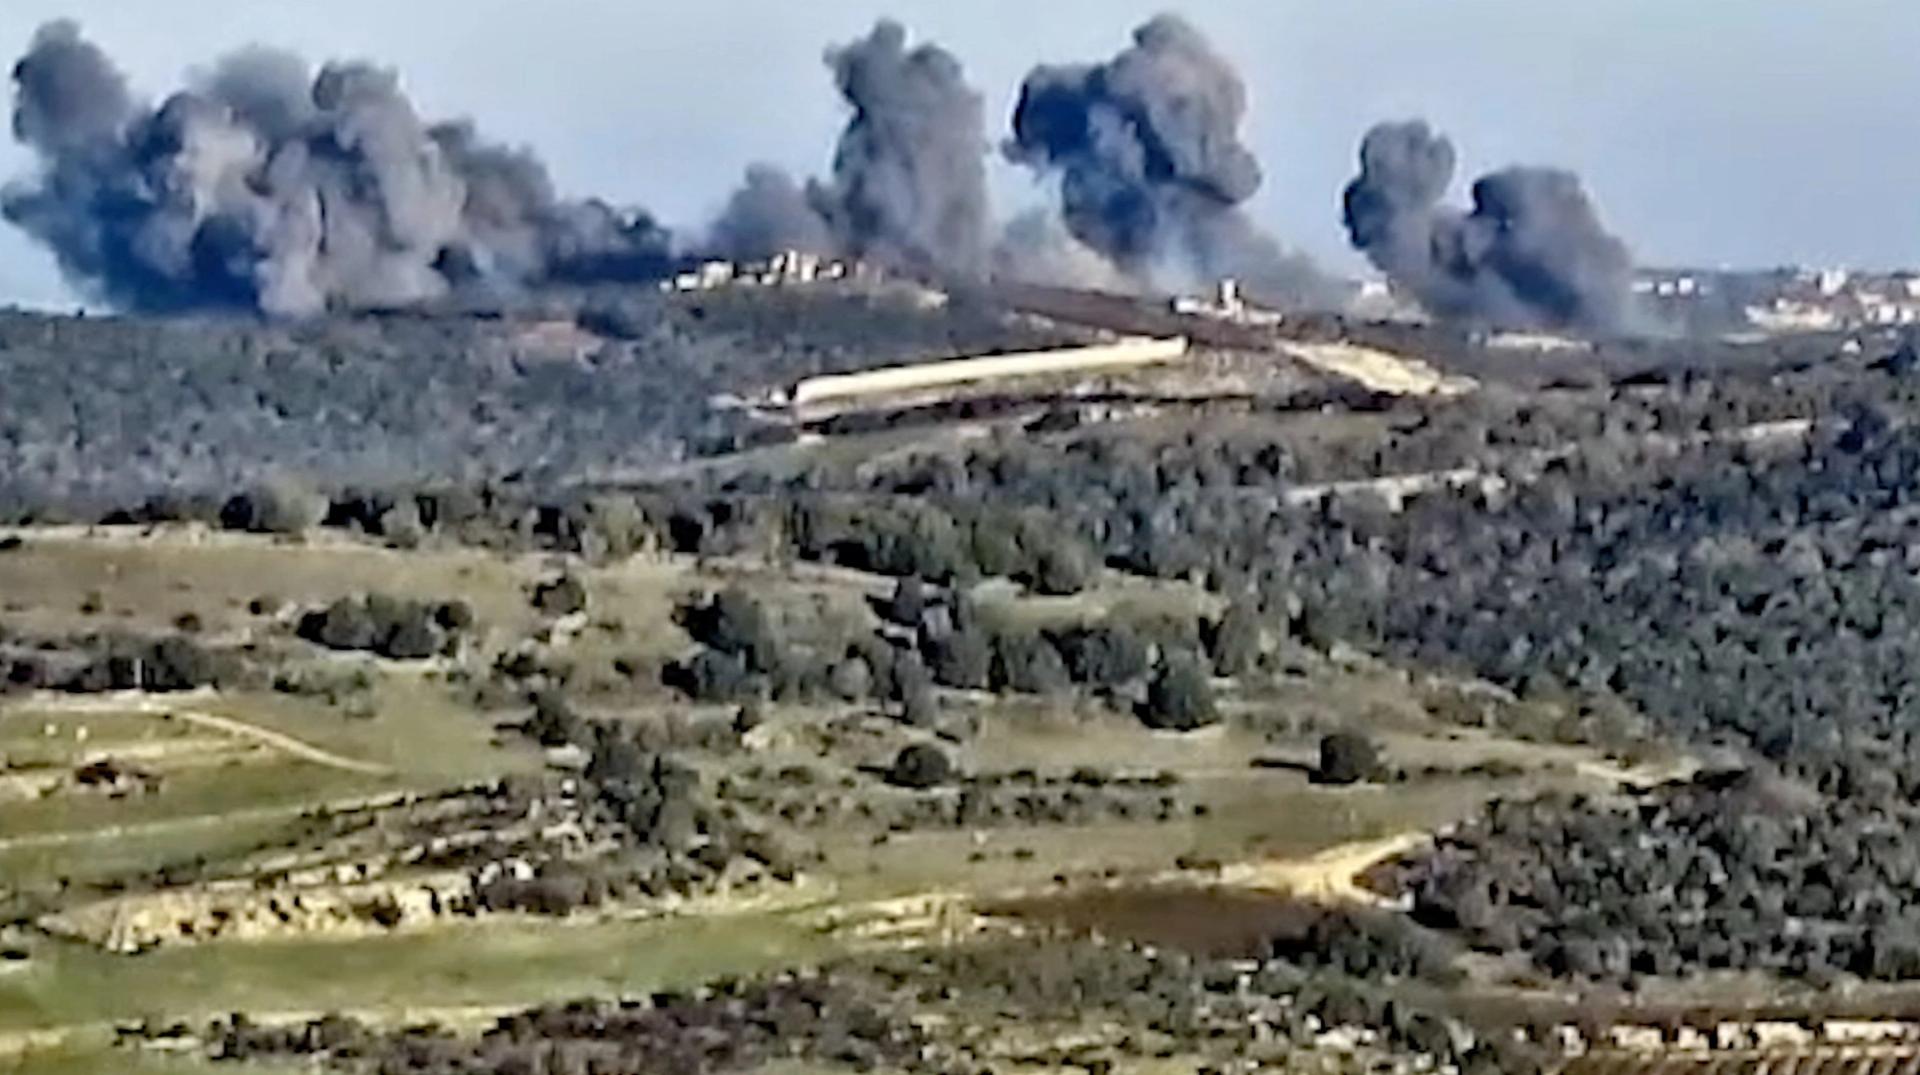 Smoke rises following what the Israeli military says is an Israeli strike on Hezbollah targets in a location given as Lebanon, amid the ongoing cross-border hostilities between Hezbollah and Israeli forces, in this screengrab taken from a handout video released on December 20, 2023. Israel Defense Forces/Handout via REUTERS